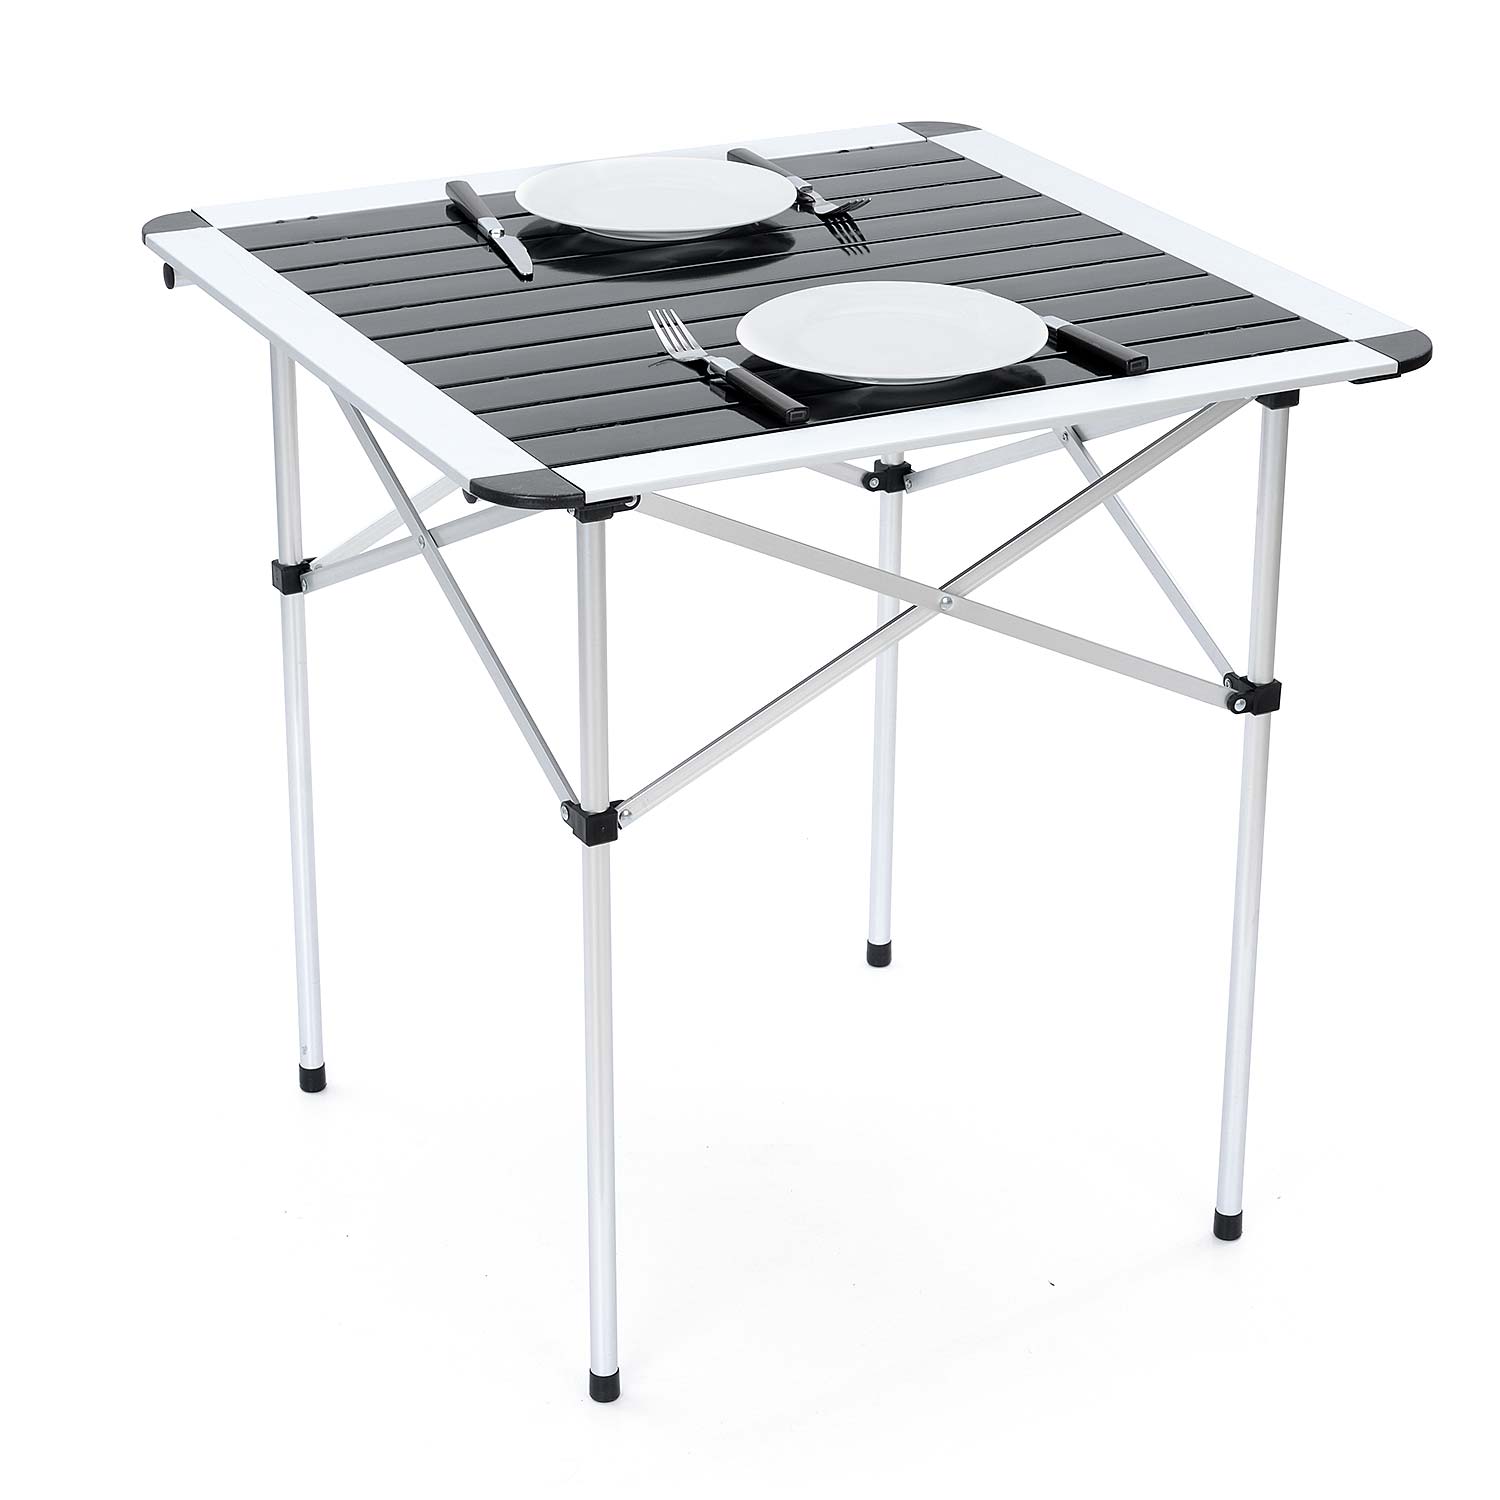 Trail Folding Aluminium Camping Table With Bag